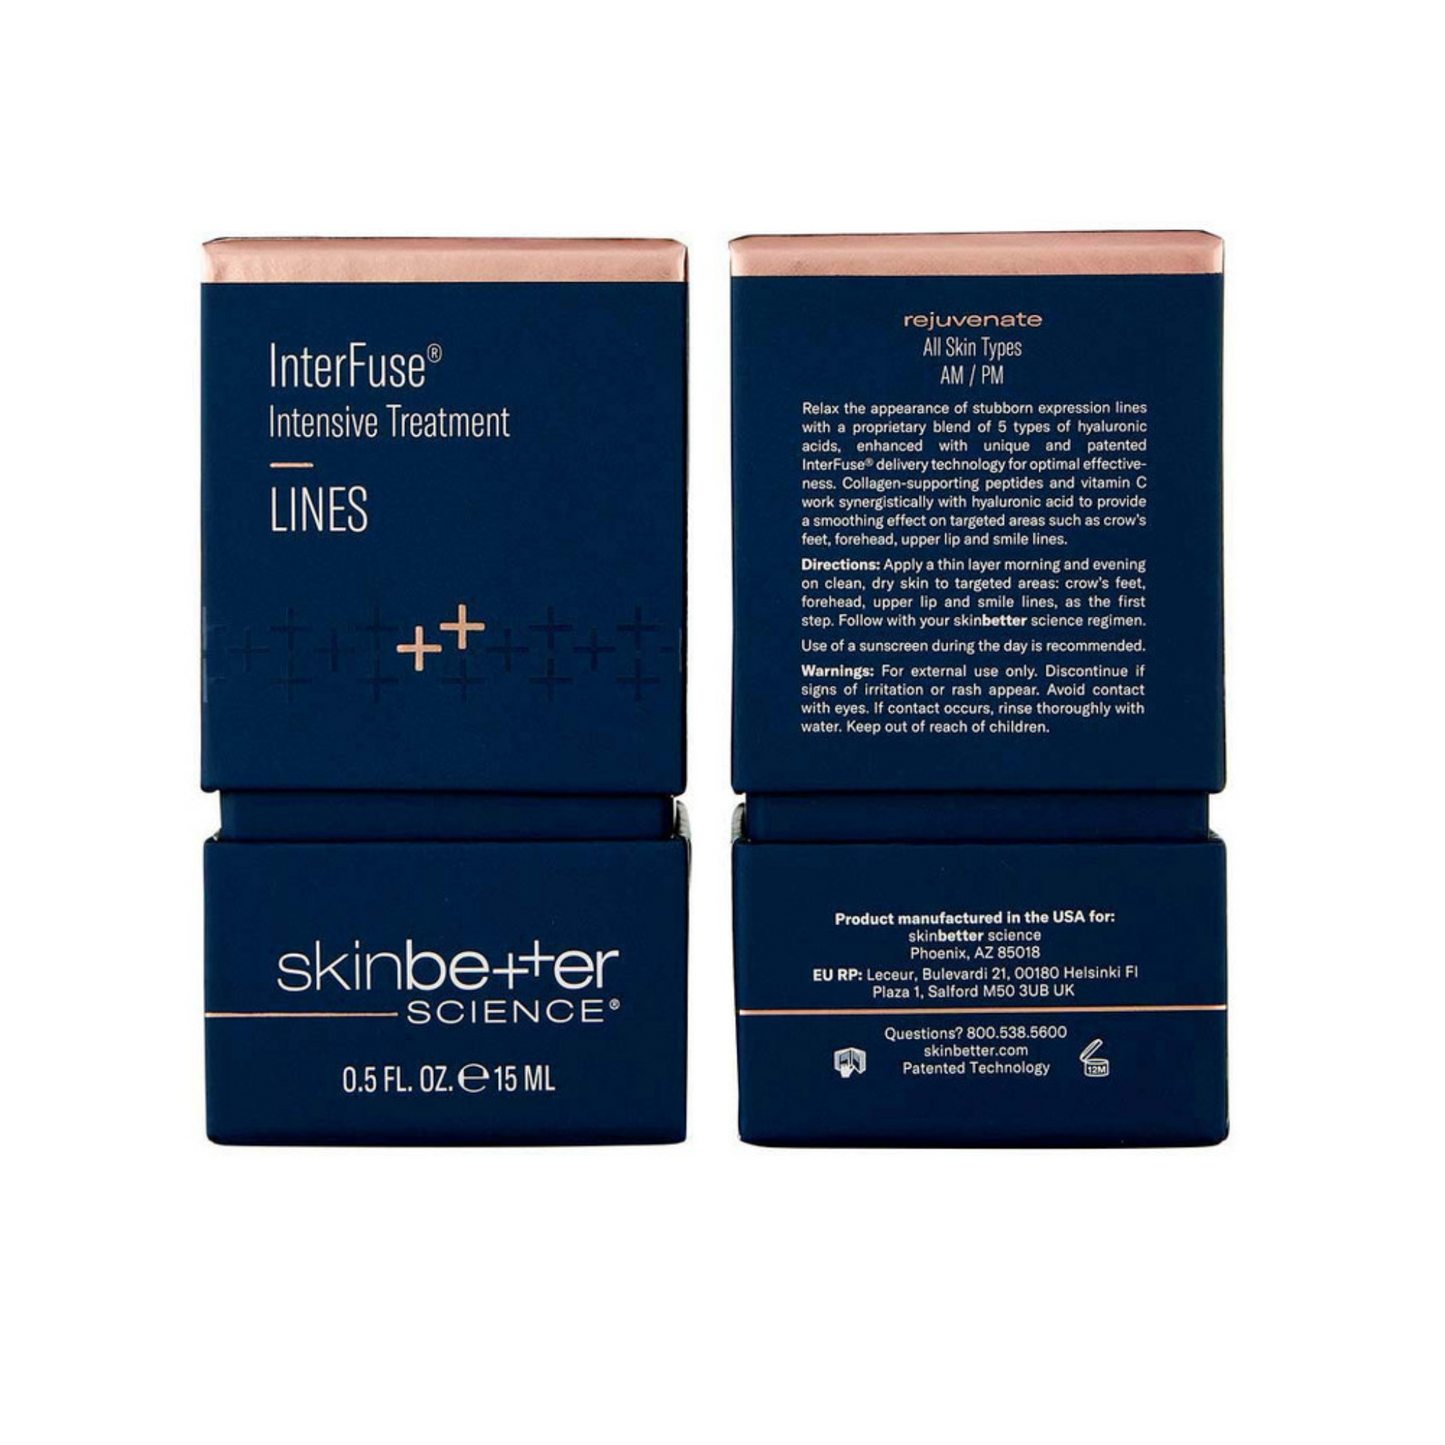 InterFuse Intensive Treatment LINES | skinbetter science®